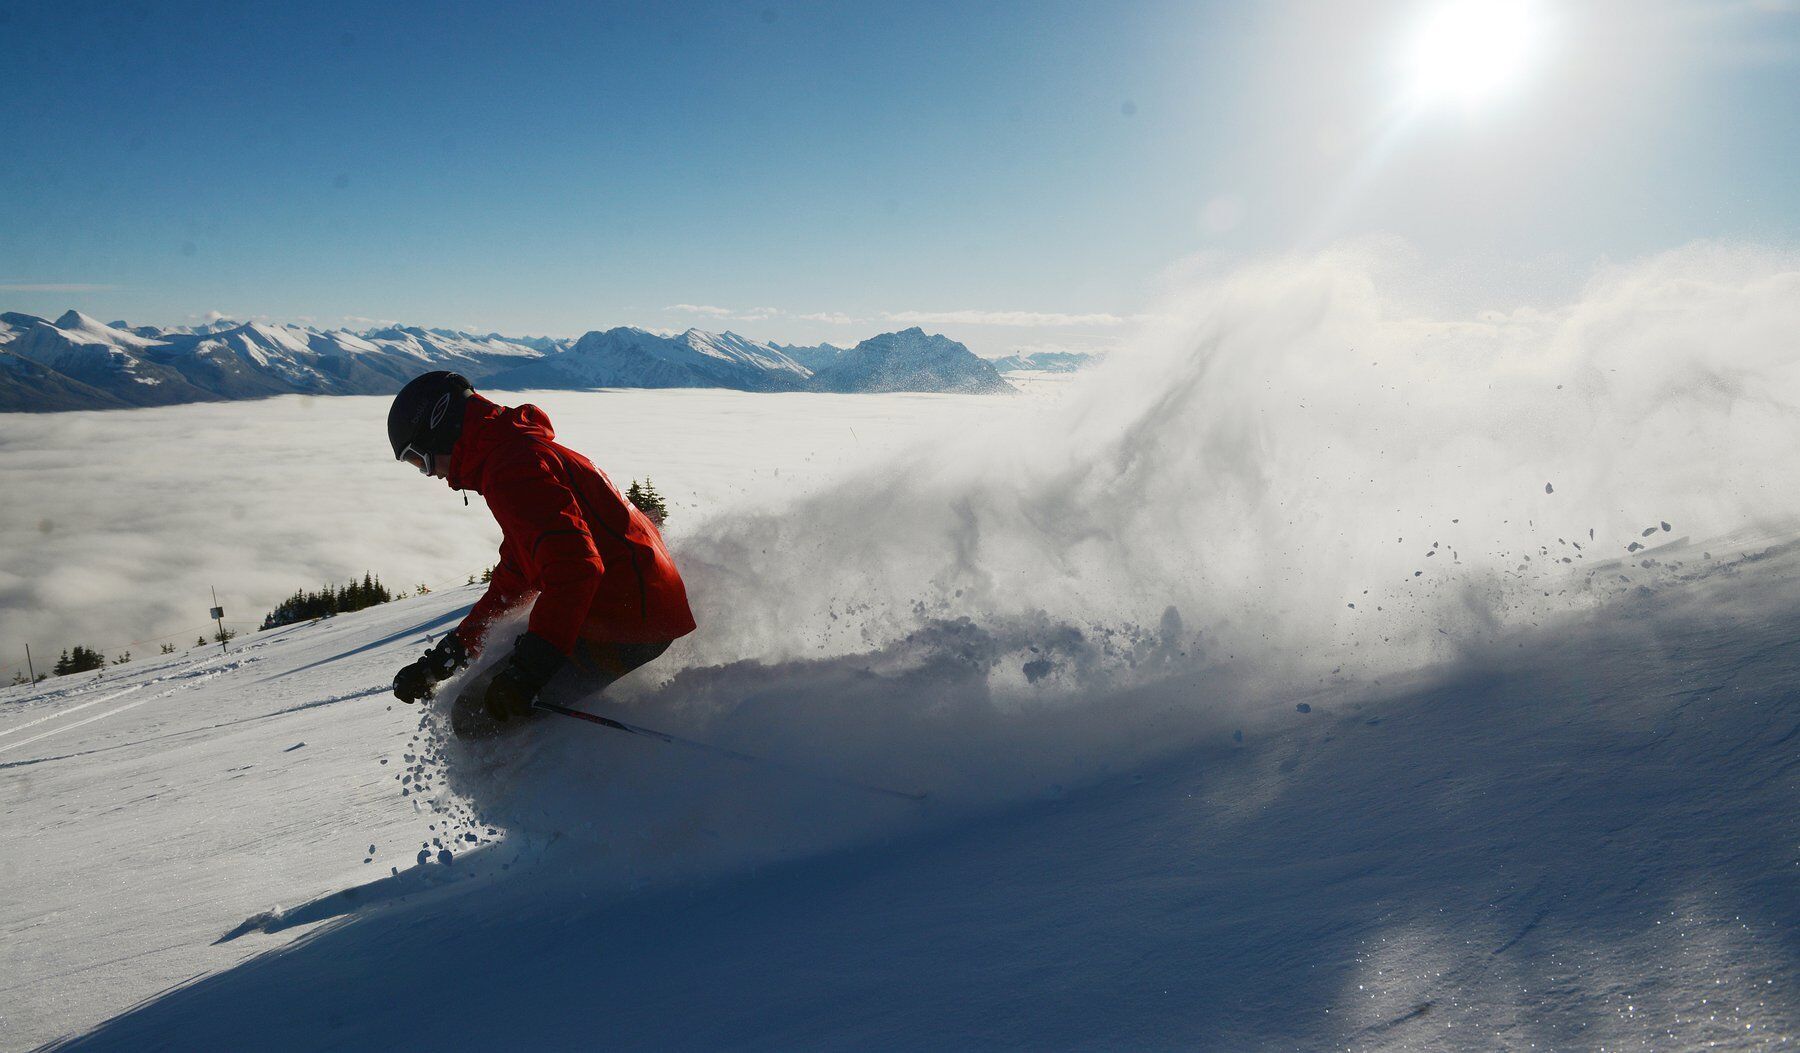 The top 10 best ski resorts in Canada to make your snowy vacation dreams come true